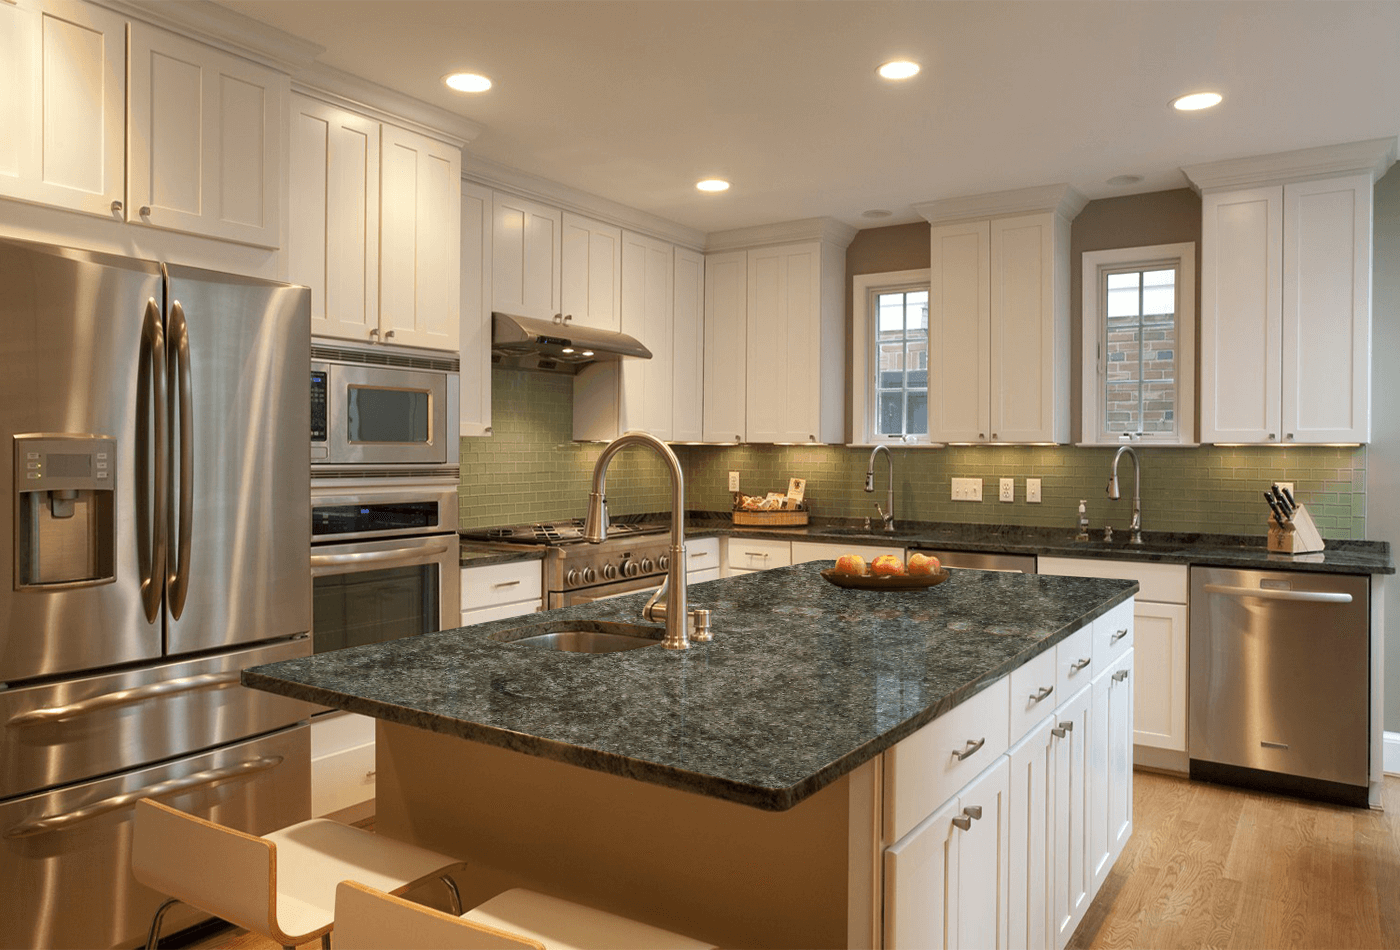 Why is Verde Granite a Great Choice for your kitchen